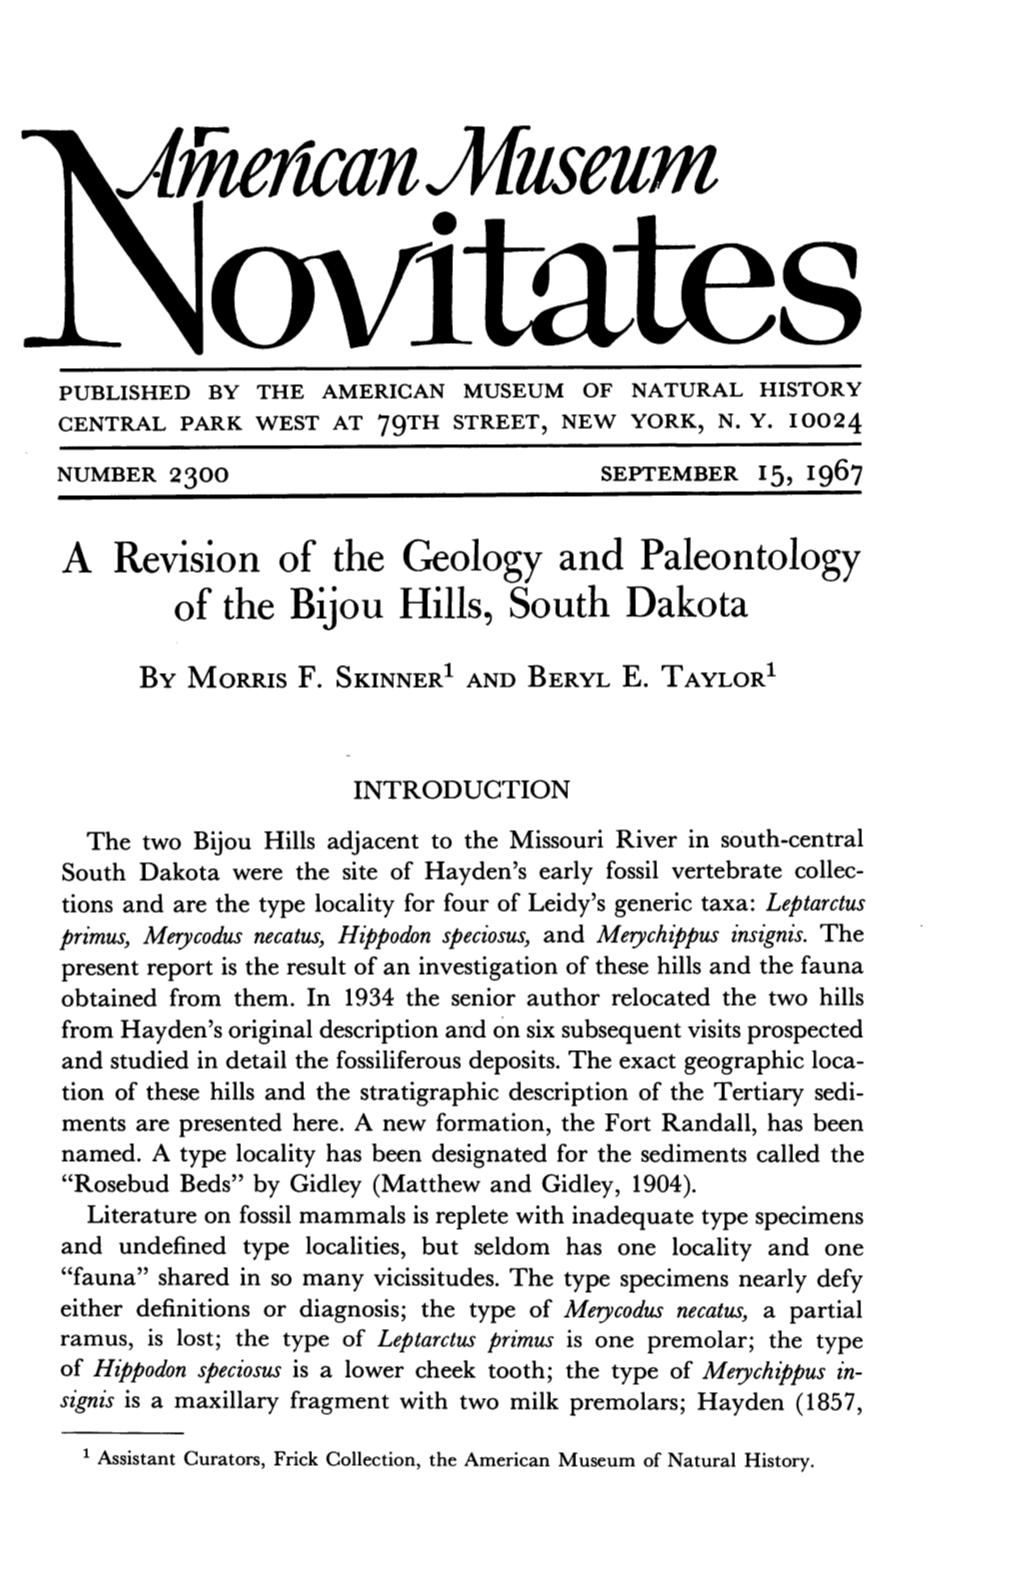 A Revision of the Geology and Paleontology of the Bijou Hills, South Dakota